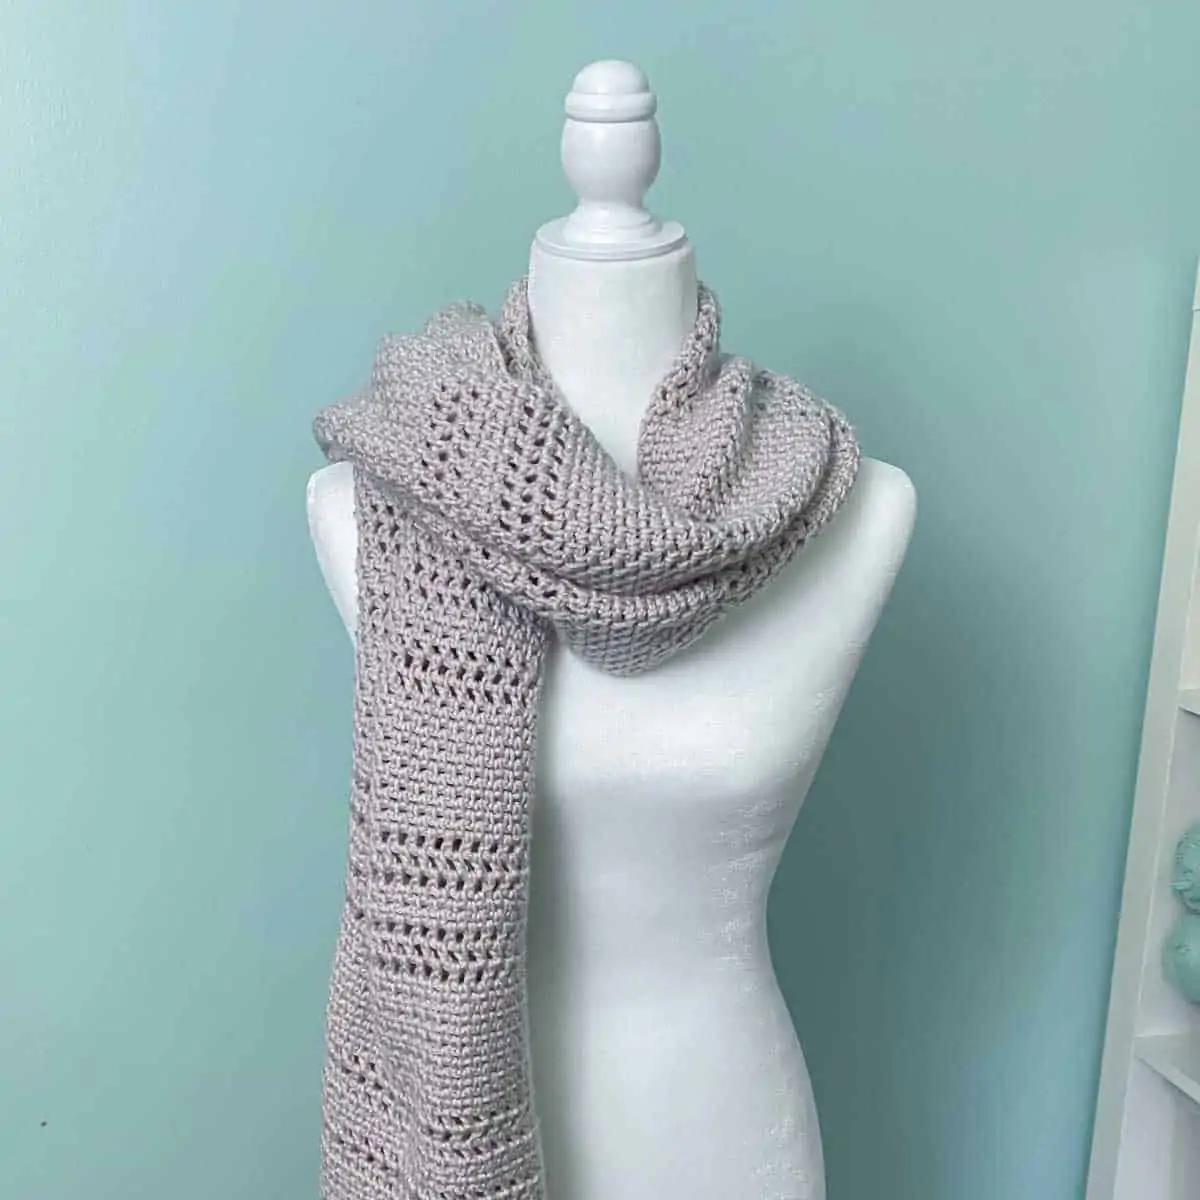 crocheted shawl folded and wrapped around the neck of a mannequin to look like a scarf